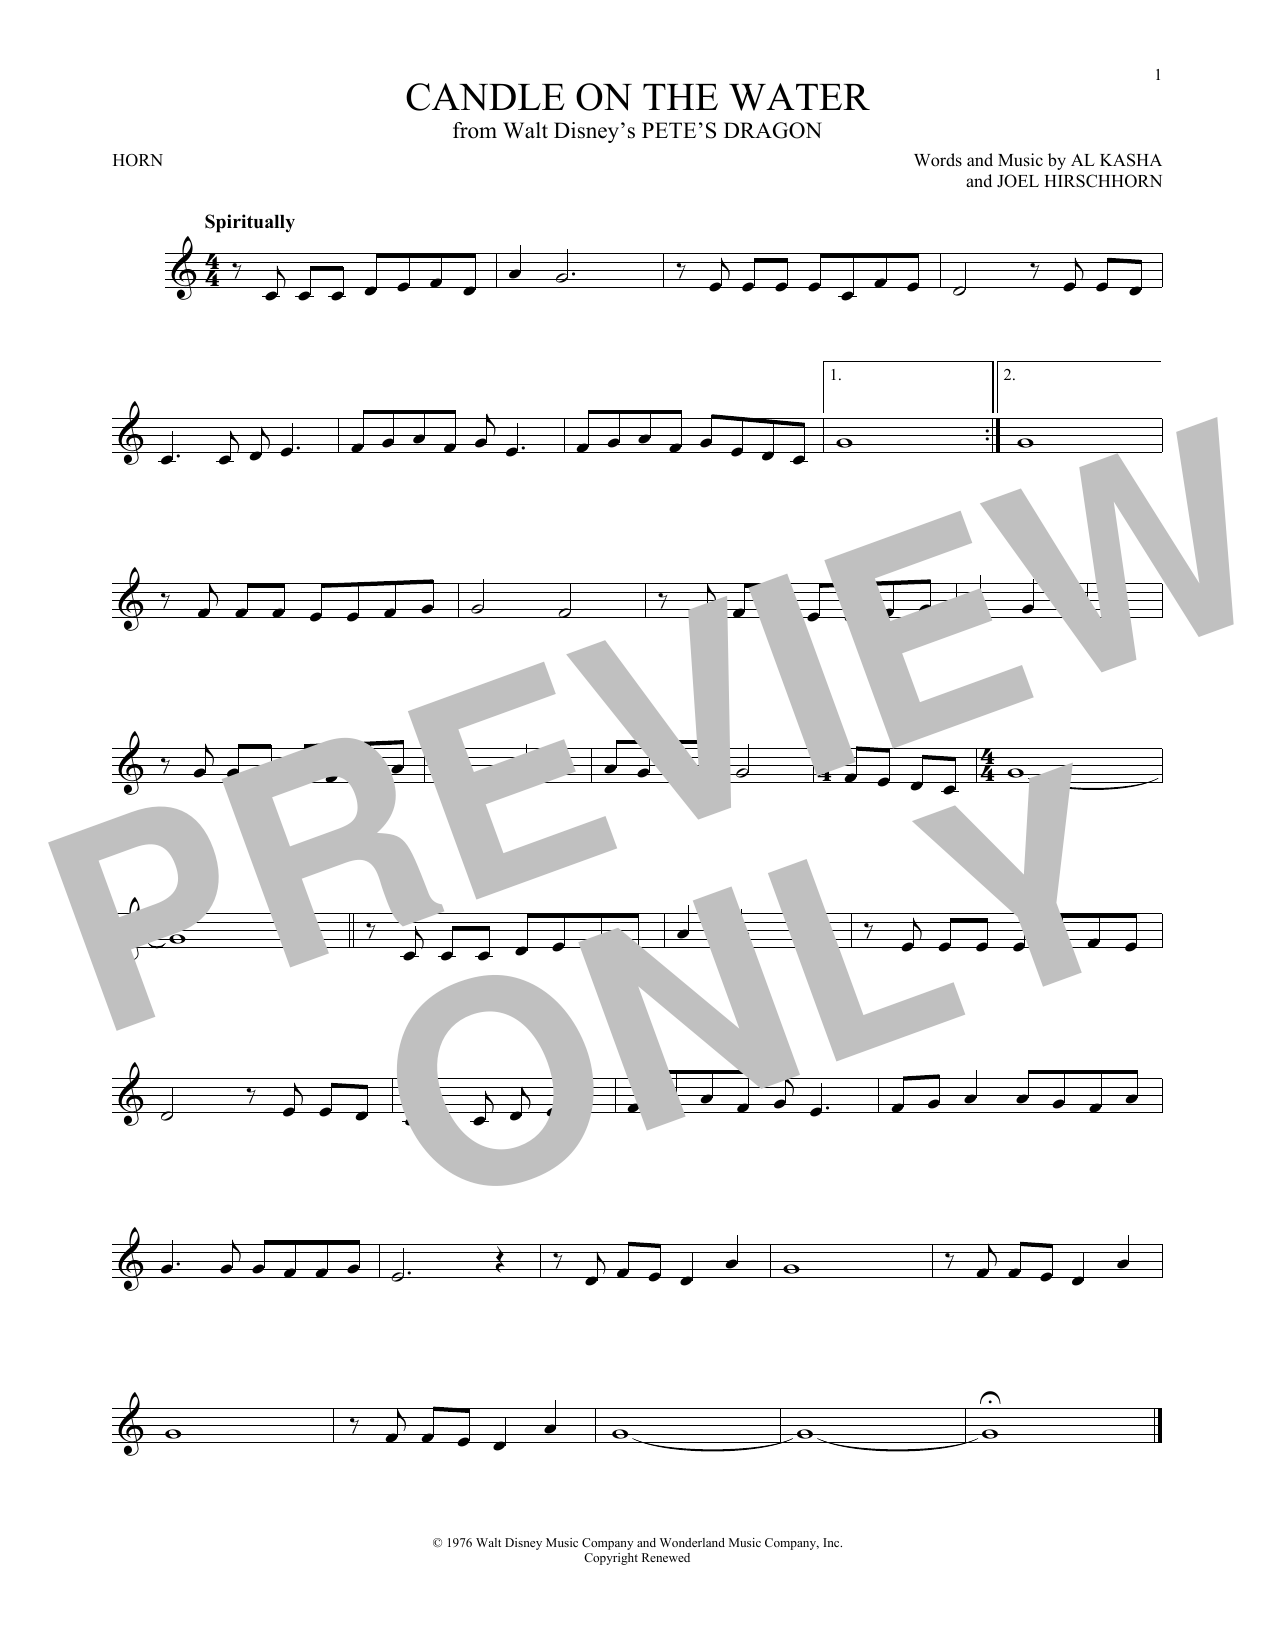 Download Kasha & Hirschhorn Candle On The Water (from Walt Disney's Sheet Music